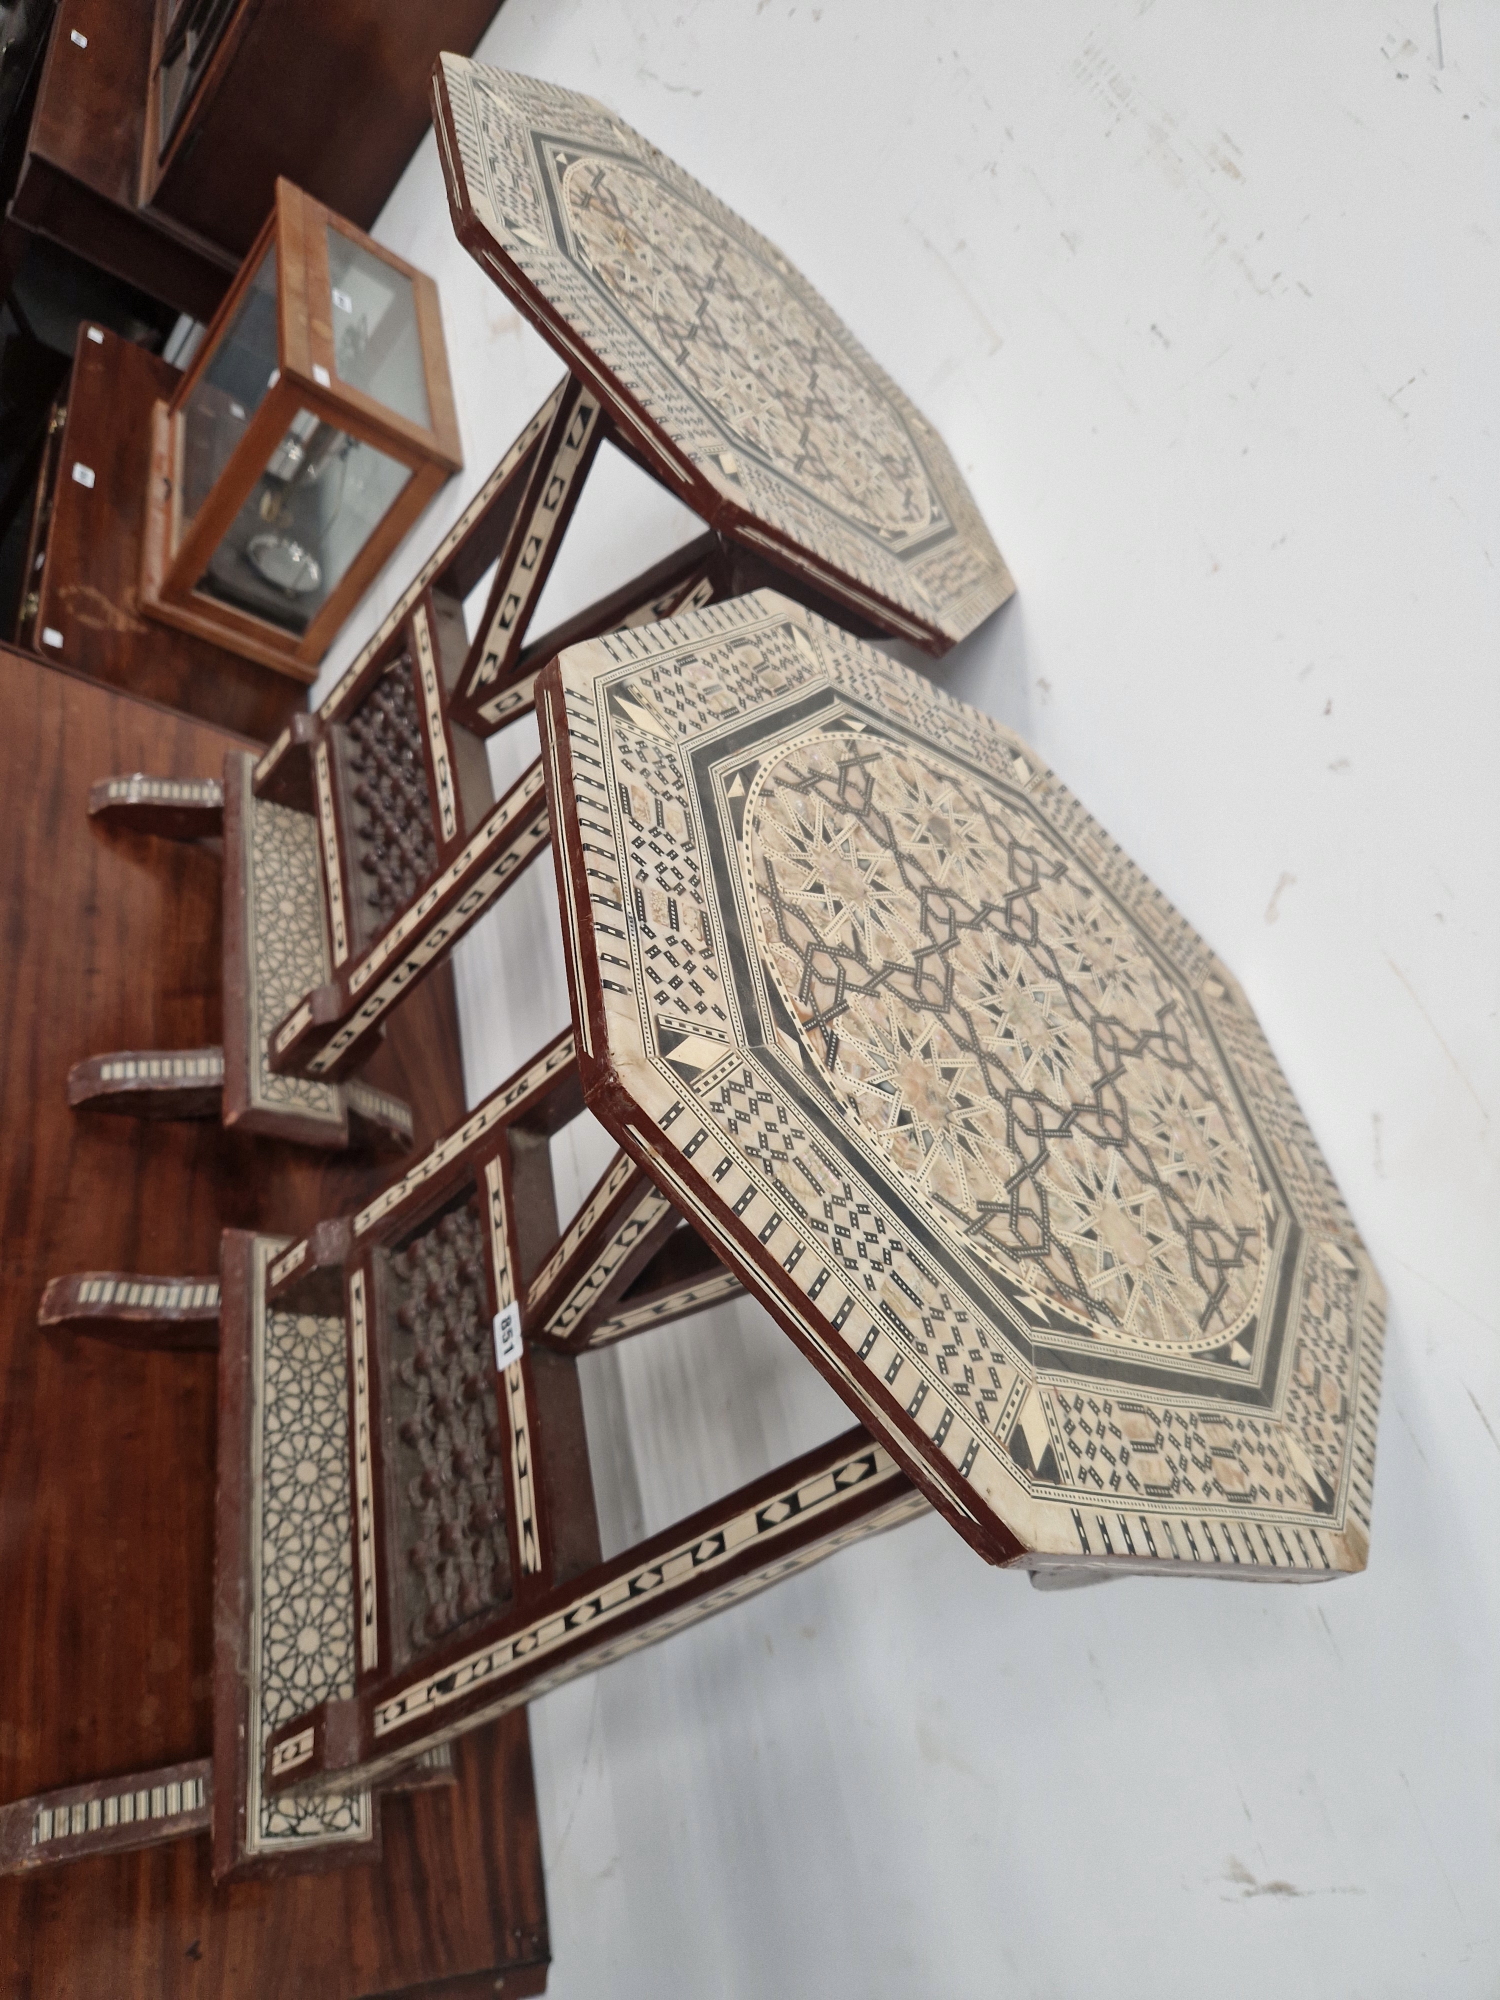 A PAIR OF ISLAMIC FOLDING OCTAGONAL TABLES GEOMETRICALLY INLAID IN MOTHER OF PEARL AND EBONY - Image 2 of 13